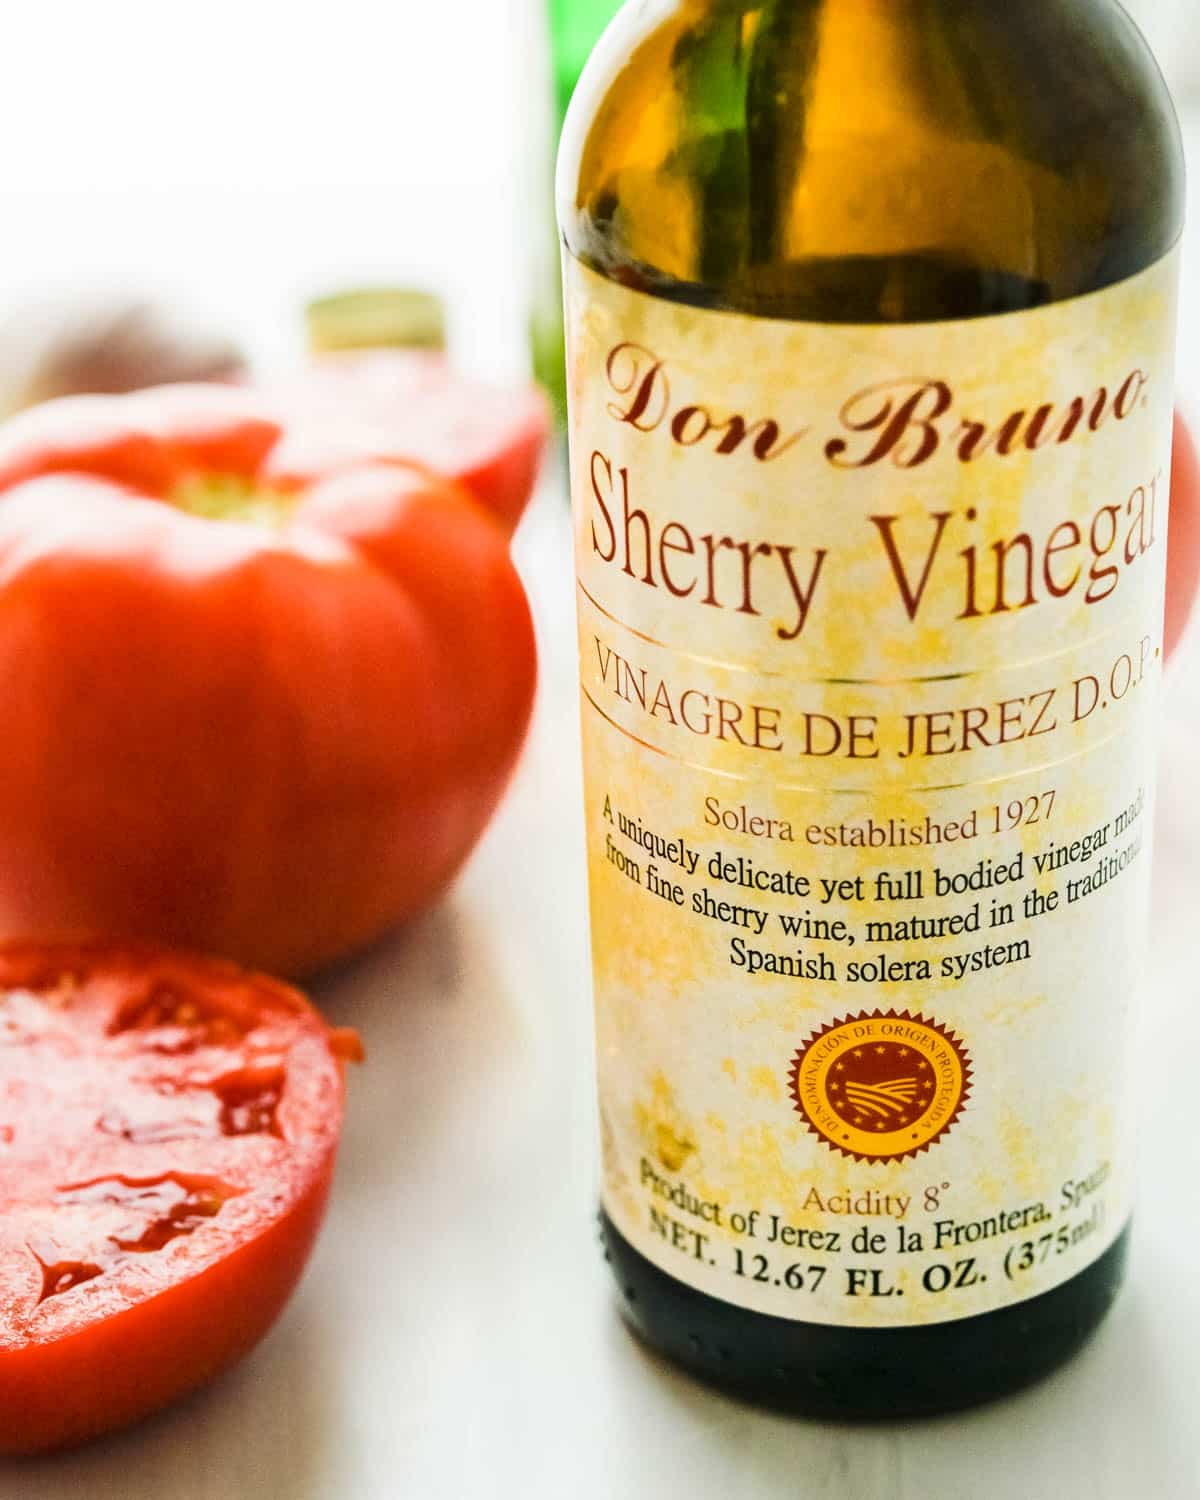 SherryVinegar is what gives the soup its distinctive flavor.